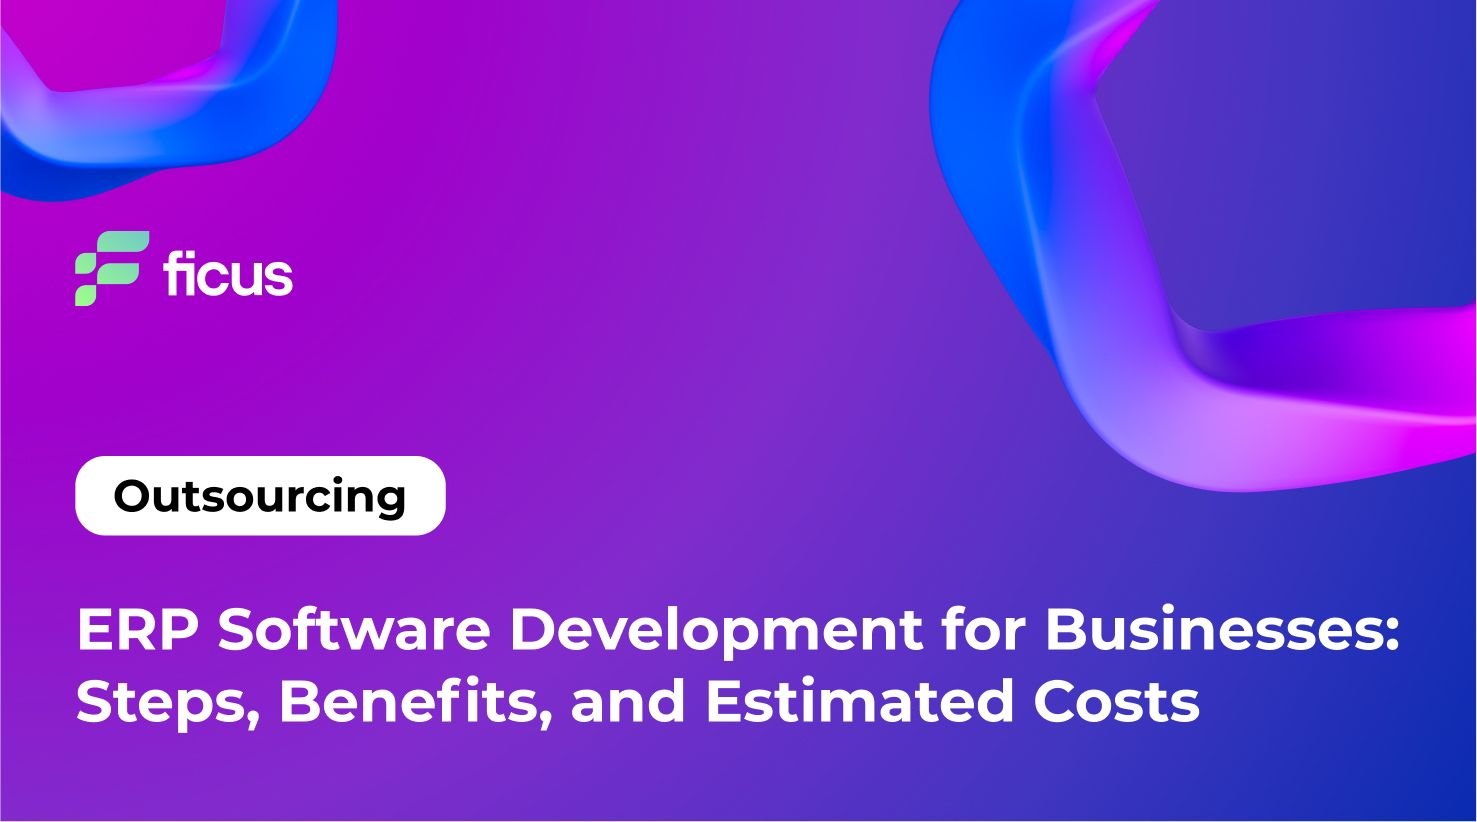 ERP Software Development for Businesses: Steps, Benefits, and Estimated Costs